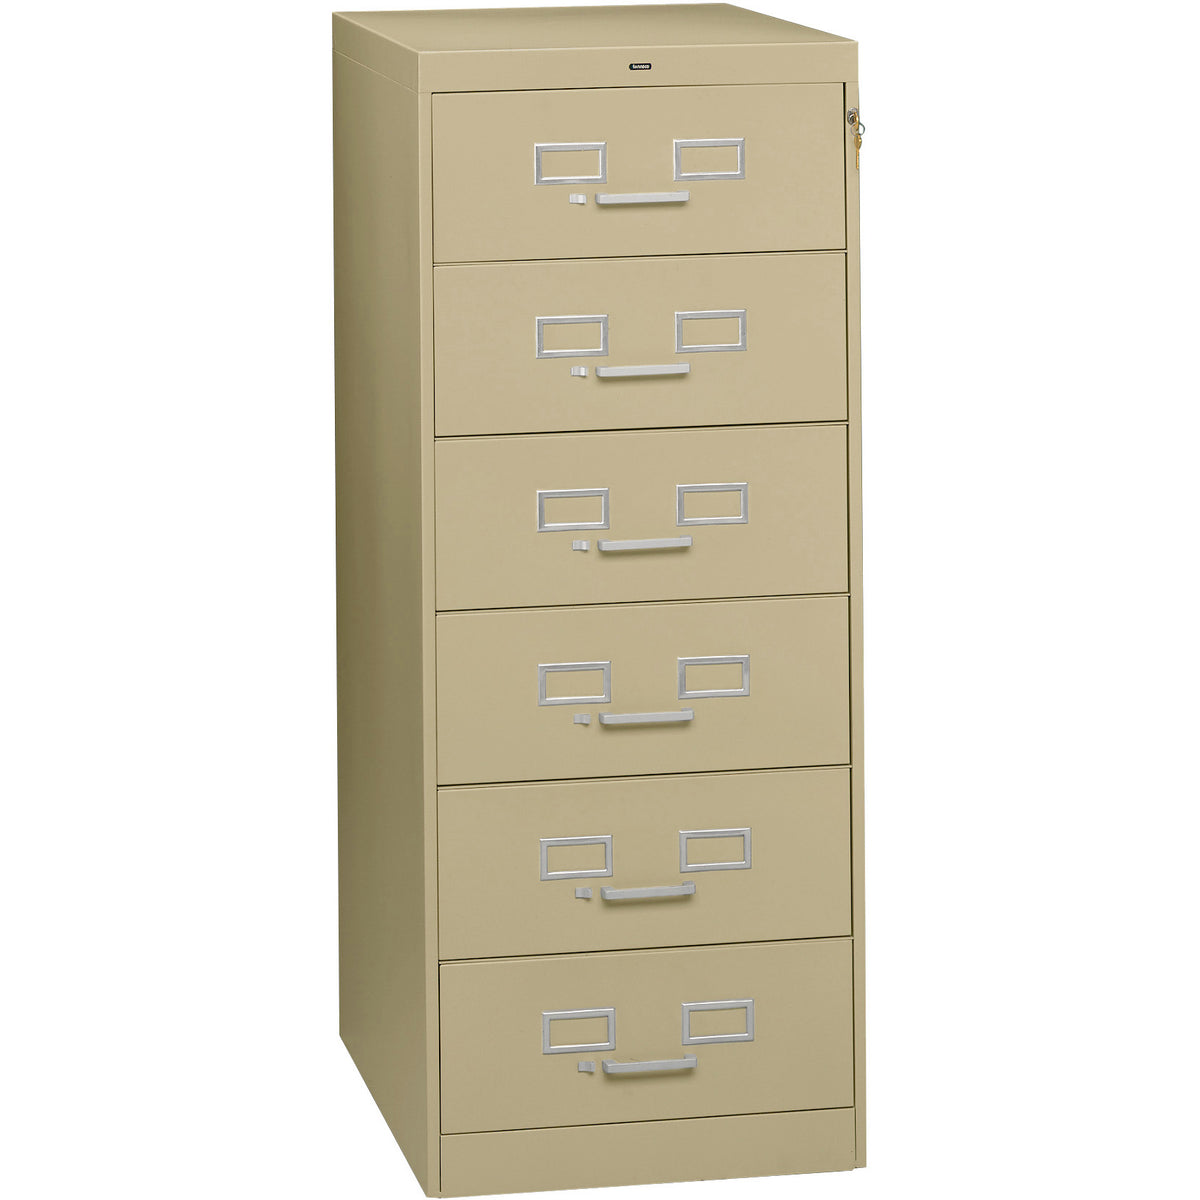 Tennsco 52" High Card File with Six Drawers, CF-669